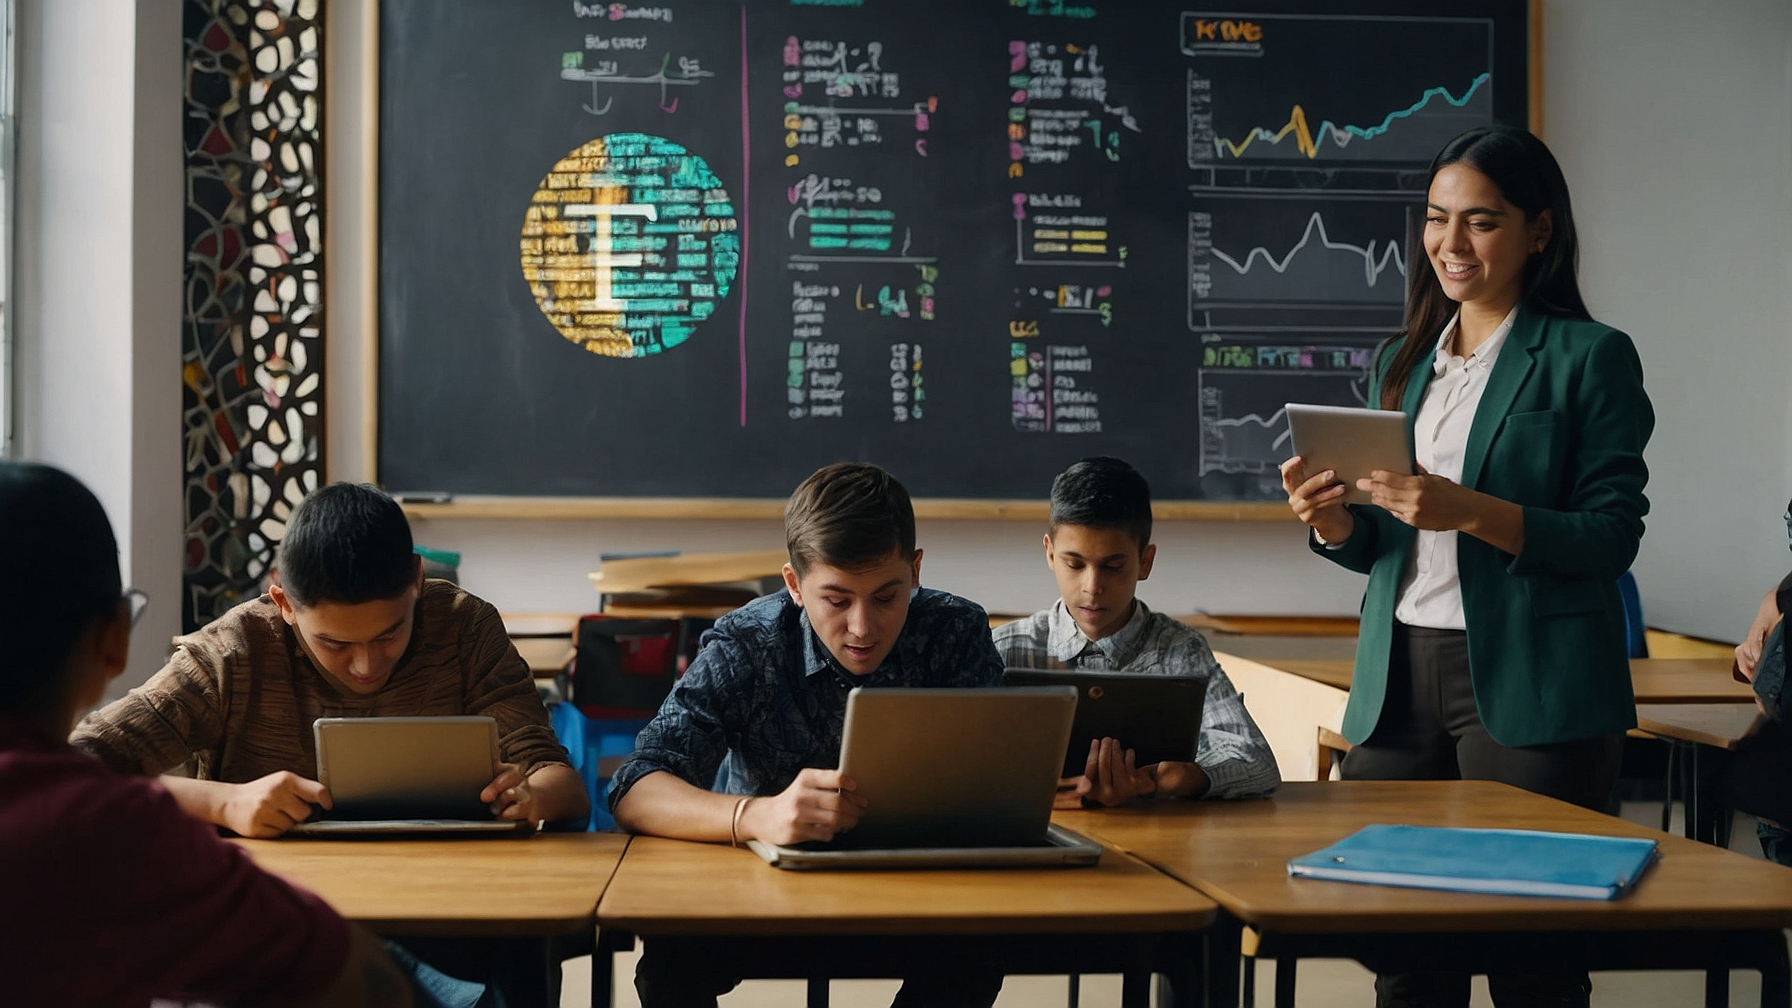 A vibrant classroom scene with an enthusiastic expert teacher explaining cryptocurrency concepts on a digital blackboard, students engaged with interactive learning tablets.